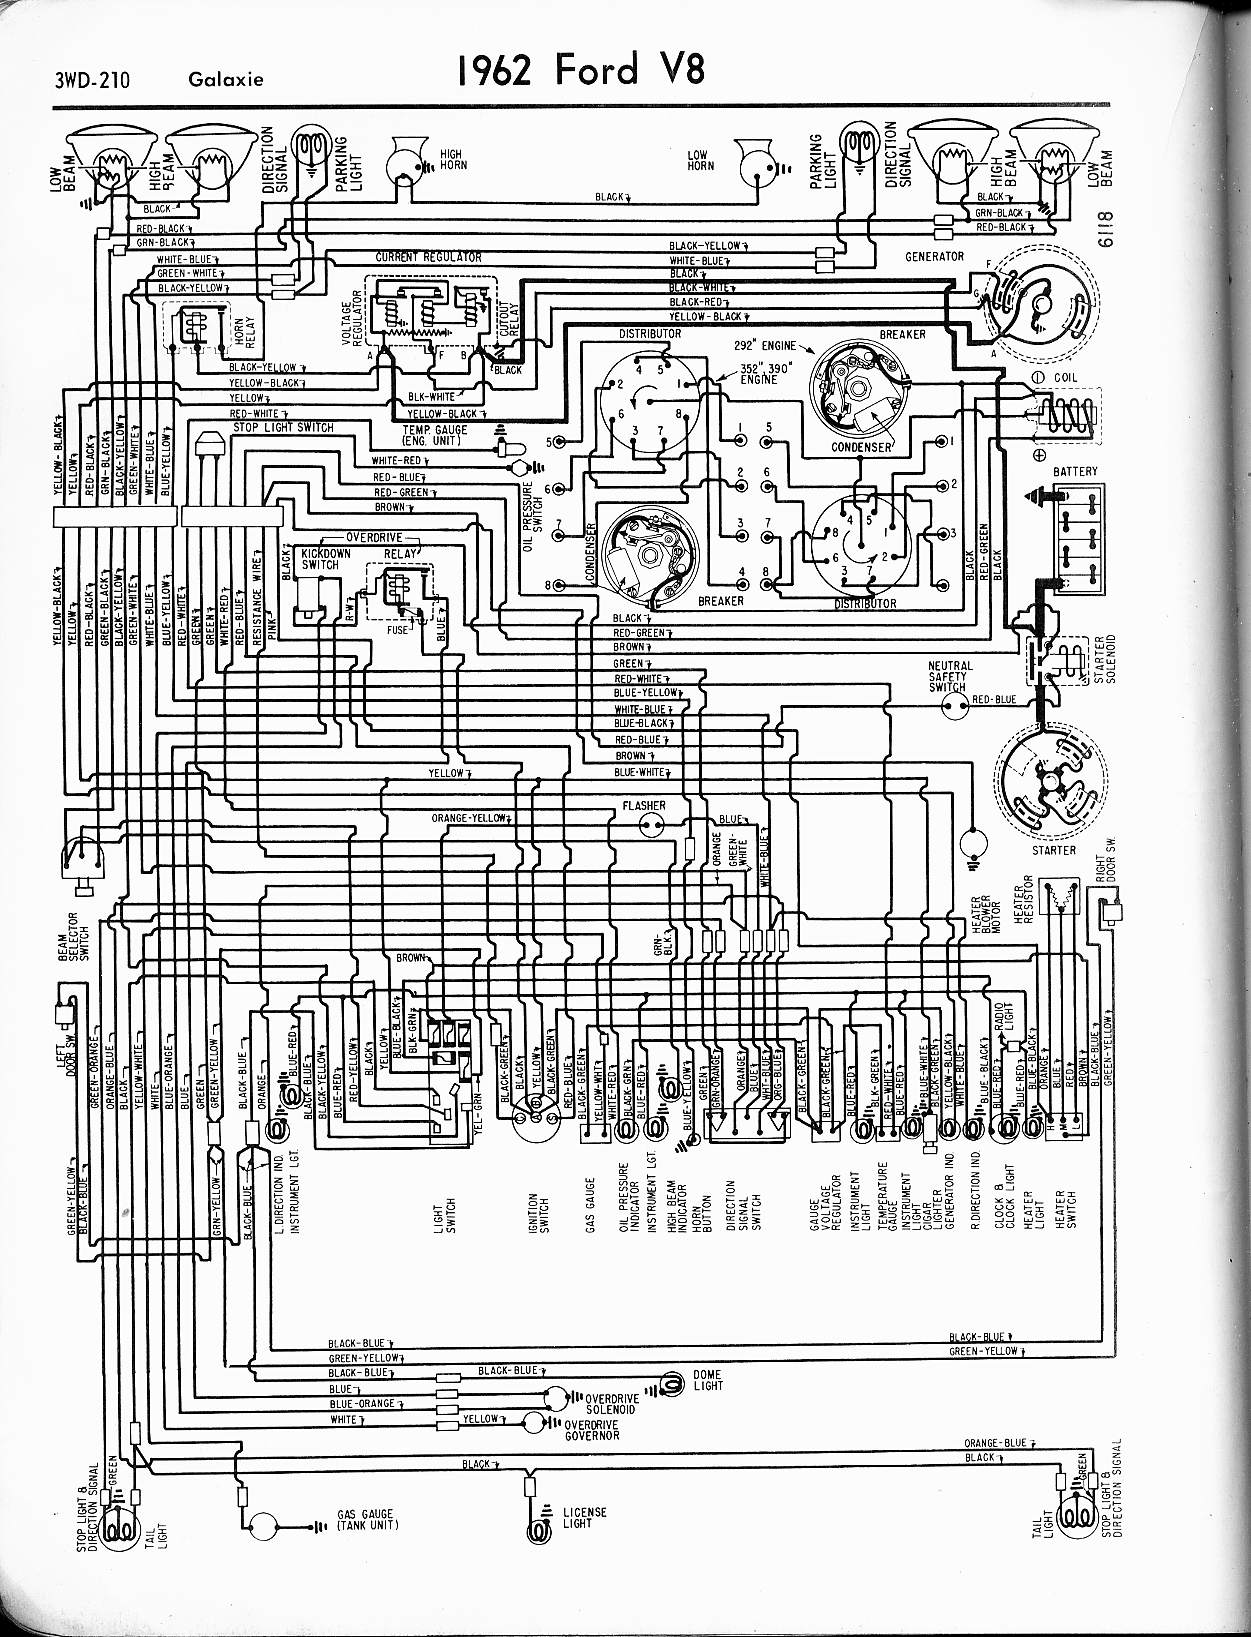 57-65 Ford Wiring Diagrams 1959 ford starter solenoid wiring 